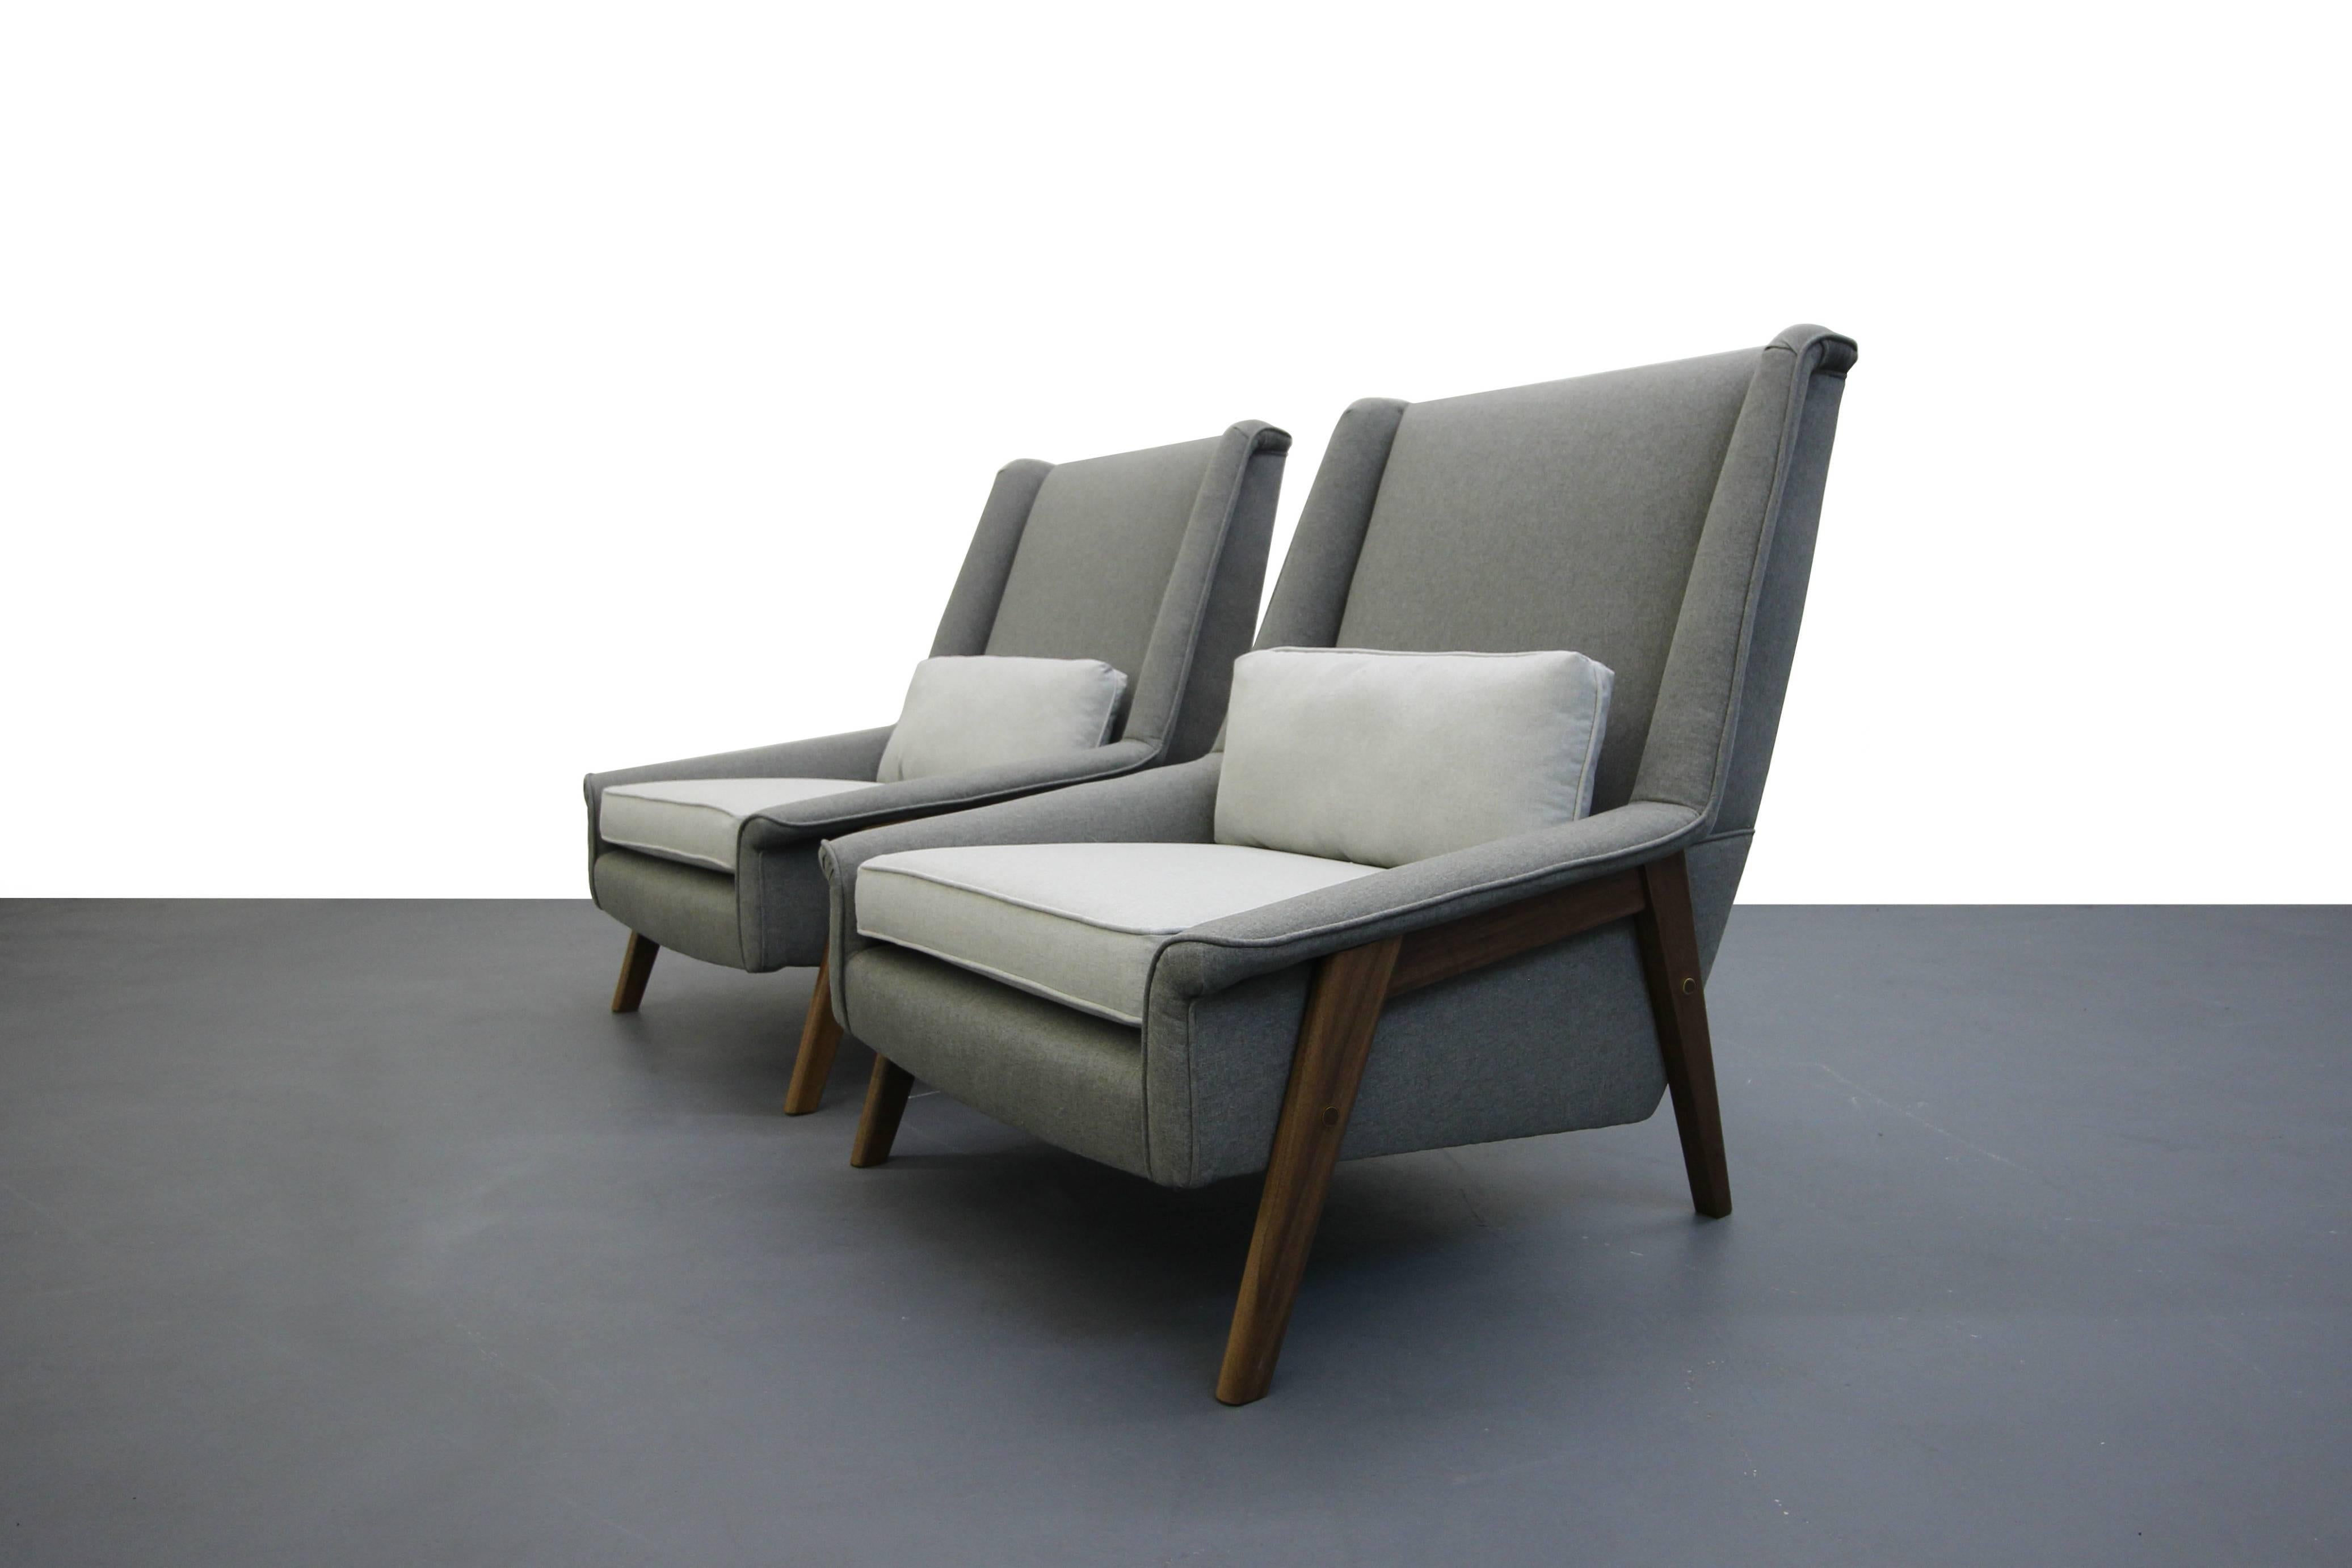 Beautiful pair of Mid-Century lounge chairs, professionally restored in a beautiful, soft, tone on tone gray fabric updating them from your grandma's chairs, to a gorgeous pair that can be incorporated into a multitude of decors. These chairs are